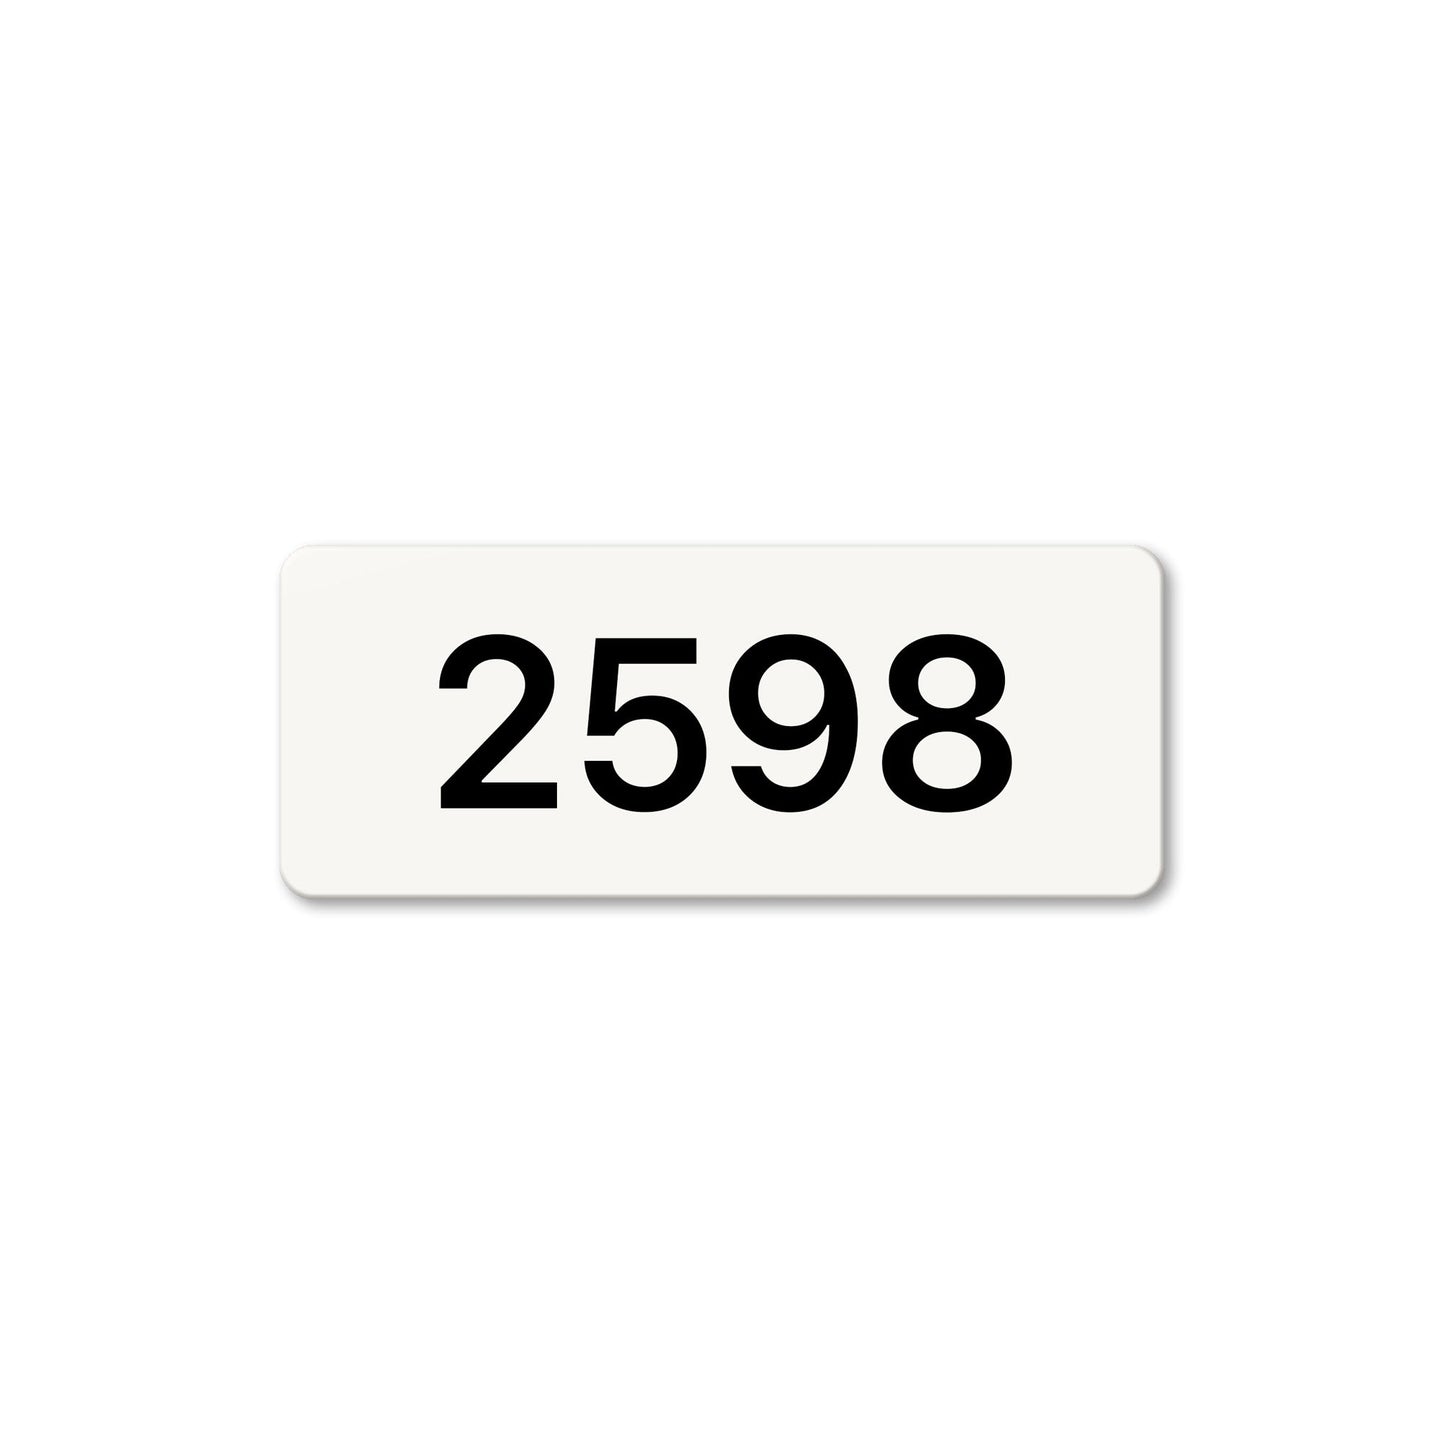 Numeral 2598